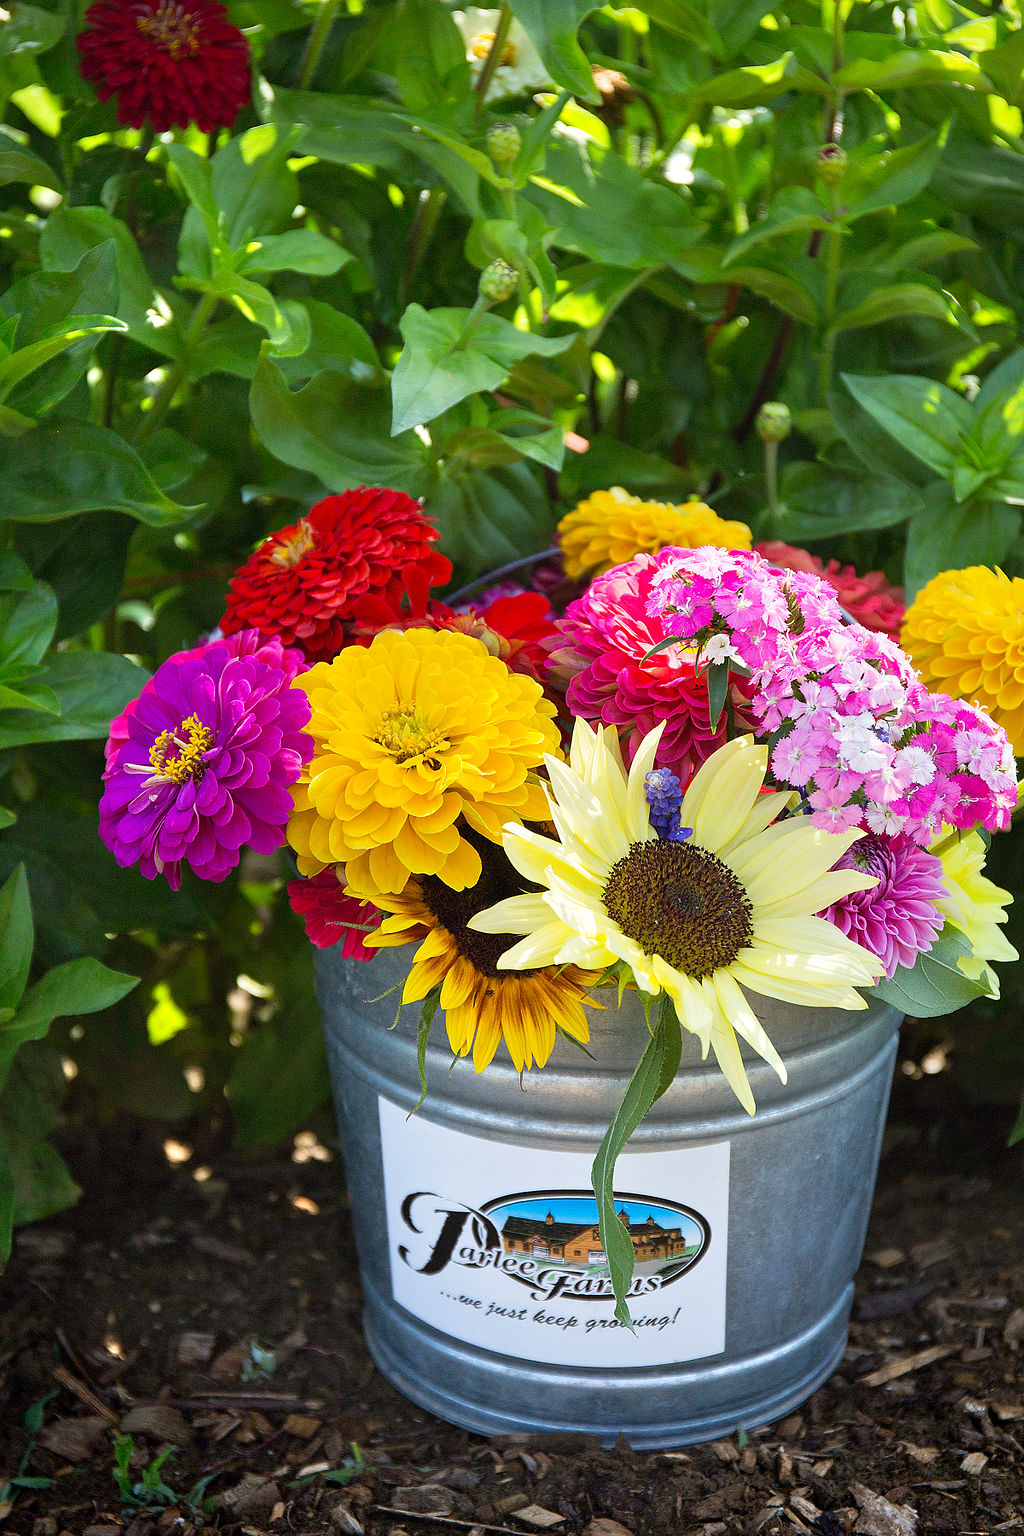 Cut Your Own Flowers at Parlee Farms